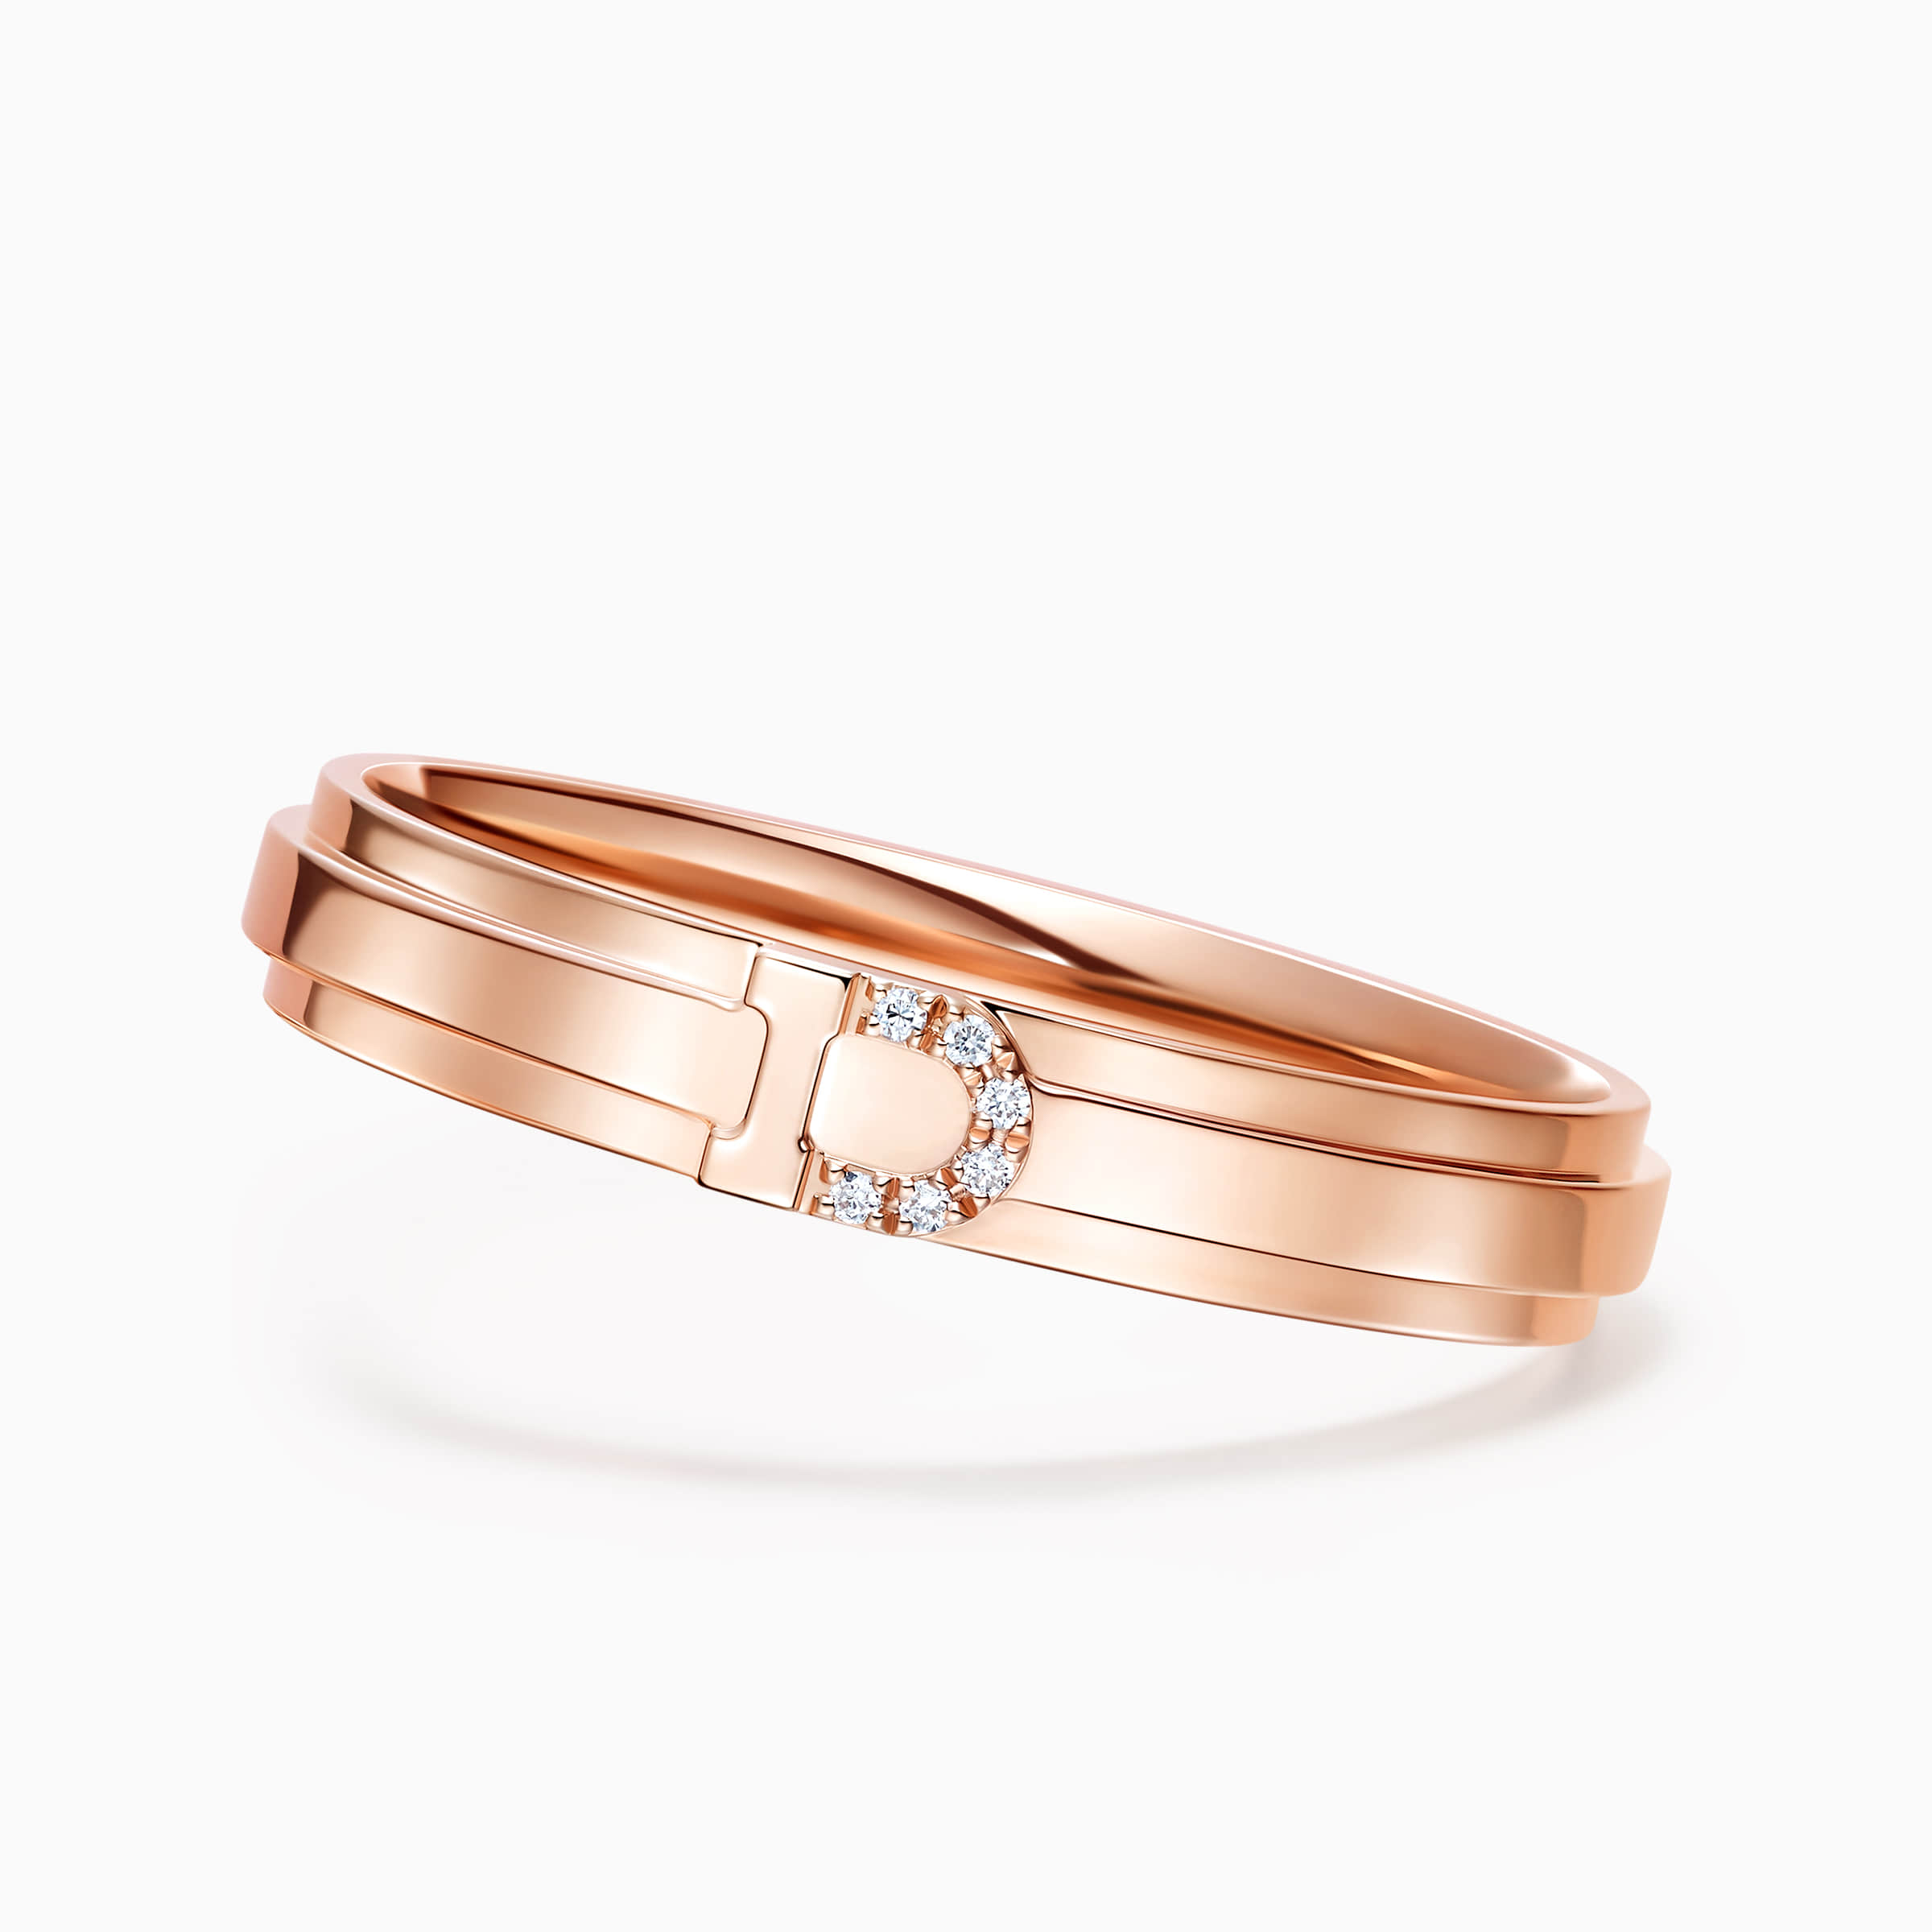 Darry Ring rose gold wedding ring sets for her